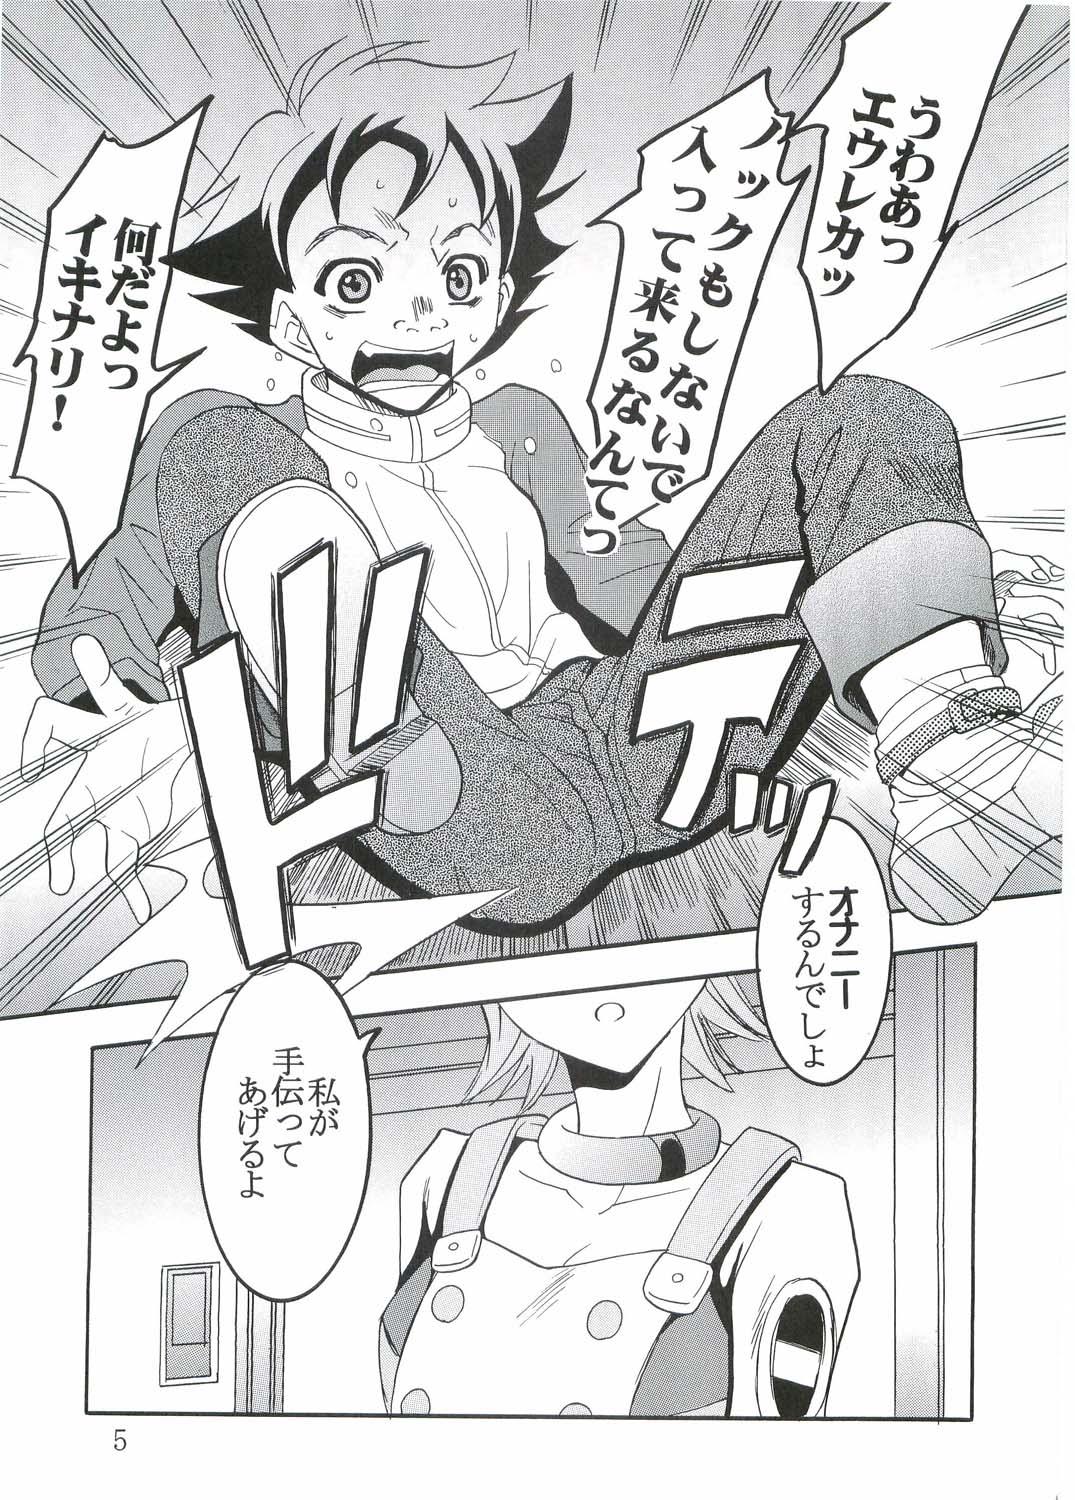 American Ura ray-out - Eureka 7 Sexcam - Page 6